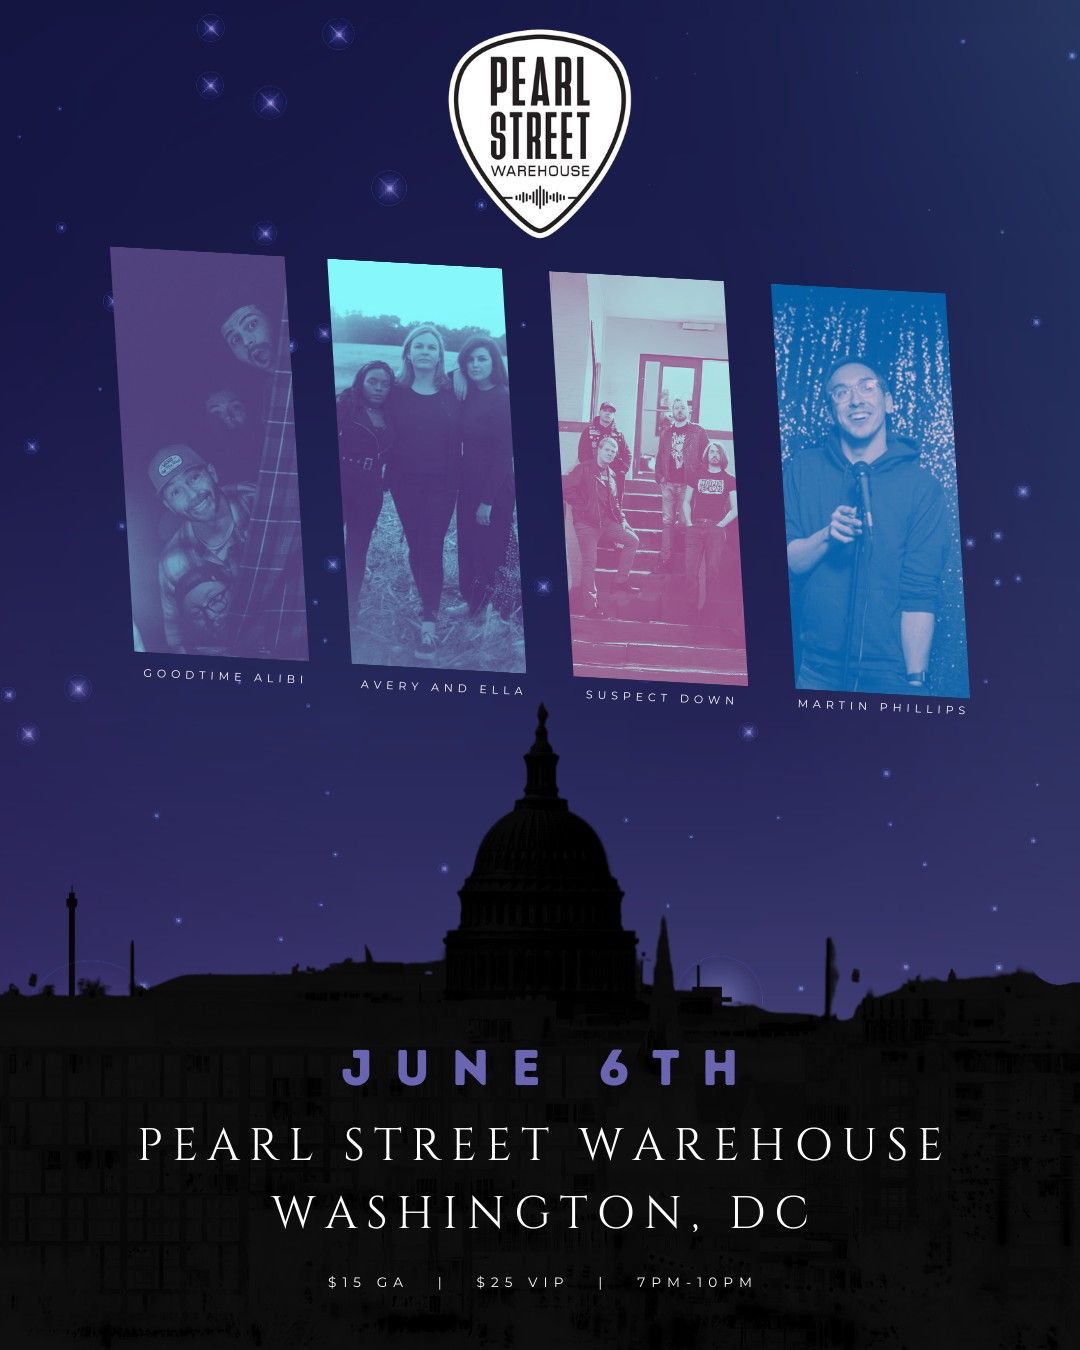 Pearl St. Warehouse [Goodtime Alibi, Avery and Ella, Suspect Down] + Special Guest Martin Phillips